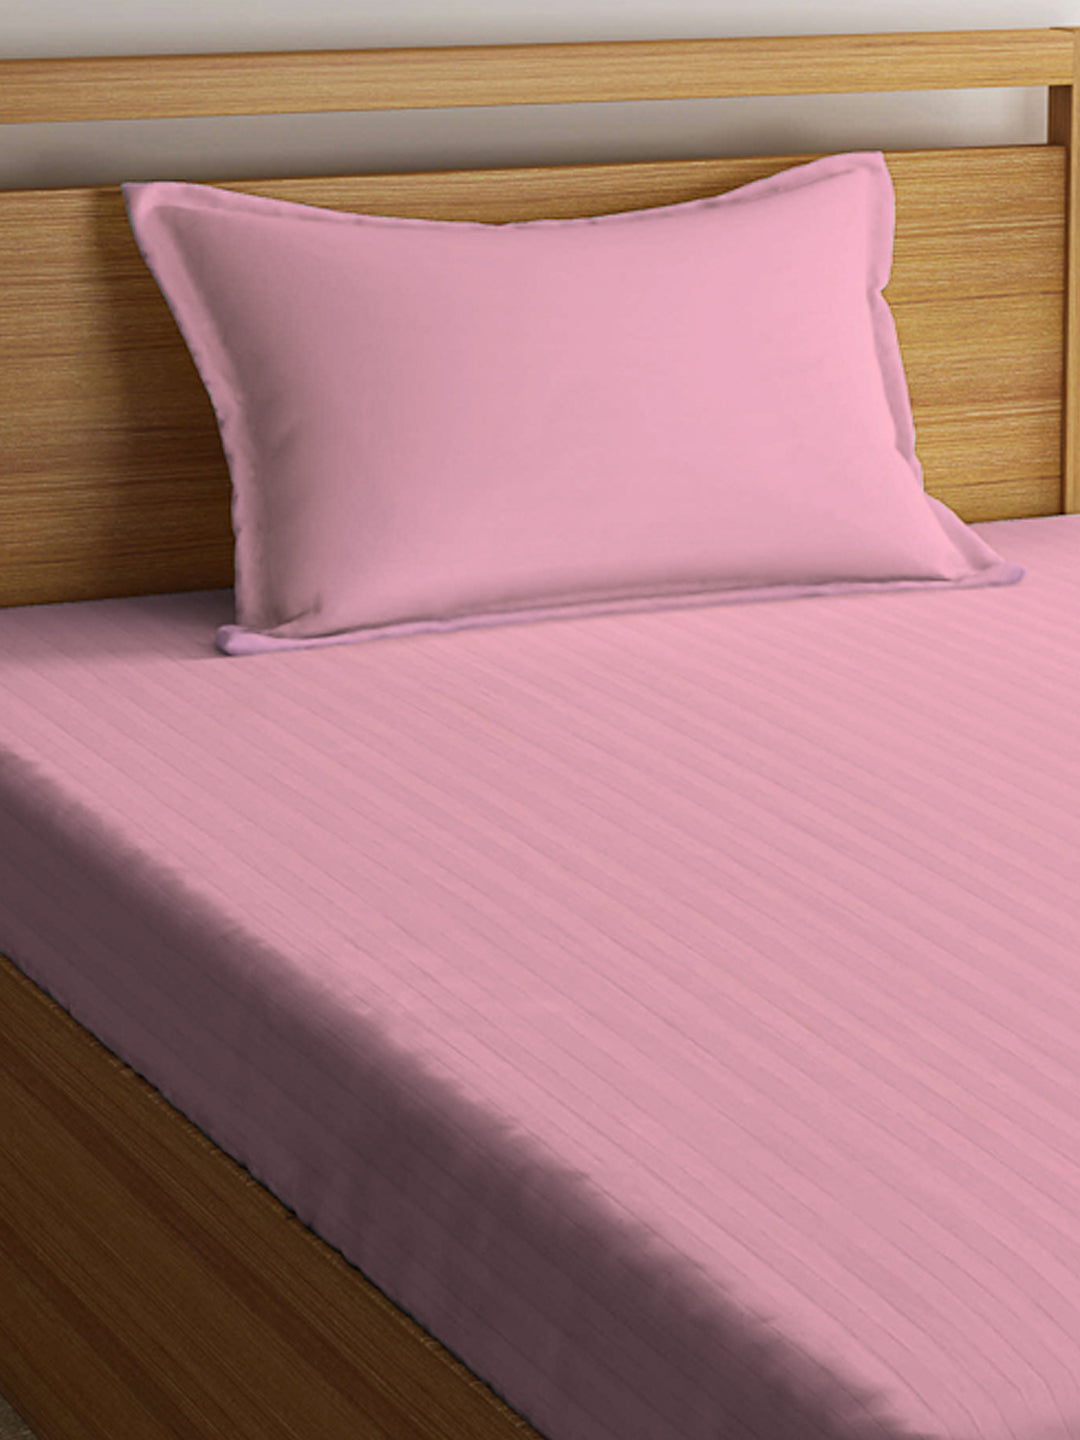 Arrabi Pink Stripes TC Cotton Blend Single Size Fitted Bedsheet with 1 Pillow Cover (220 X 150 cm)